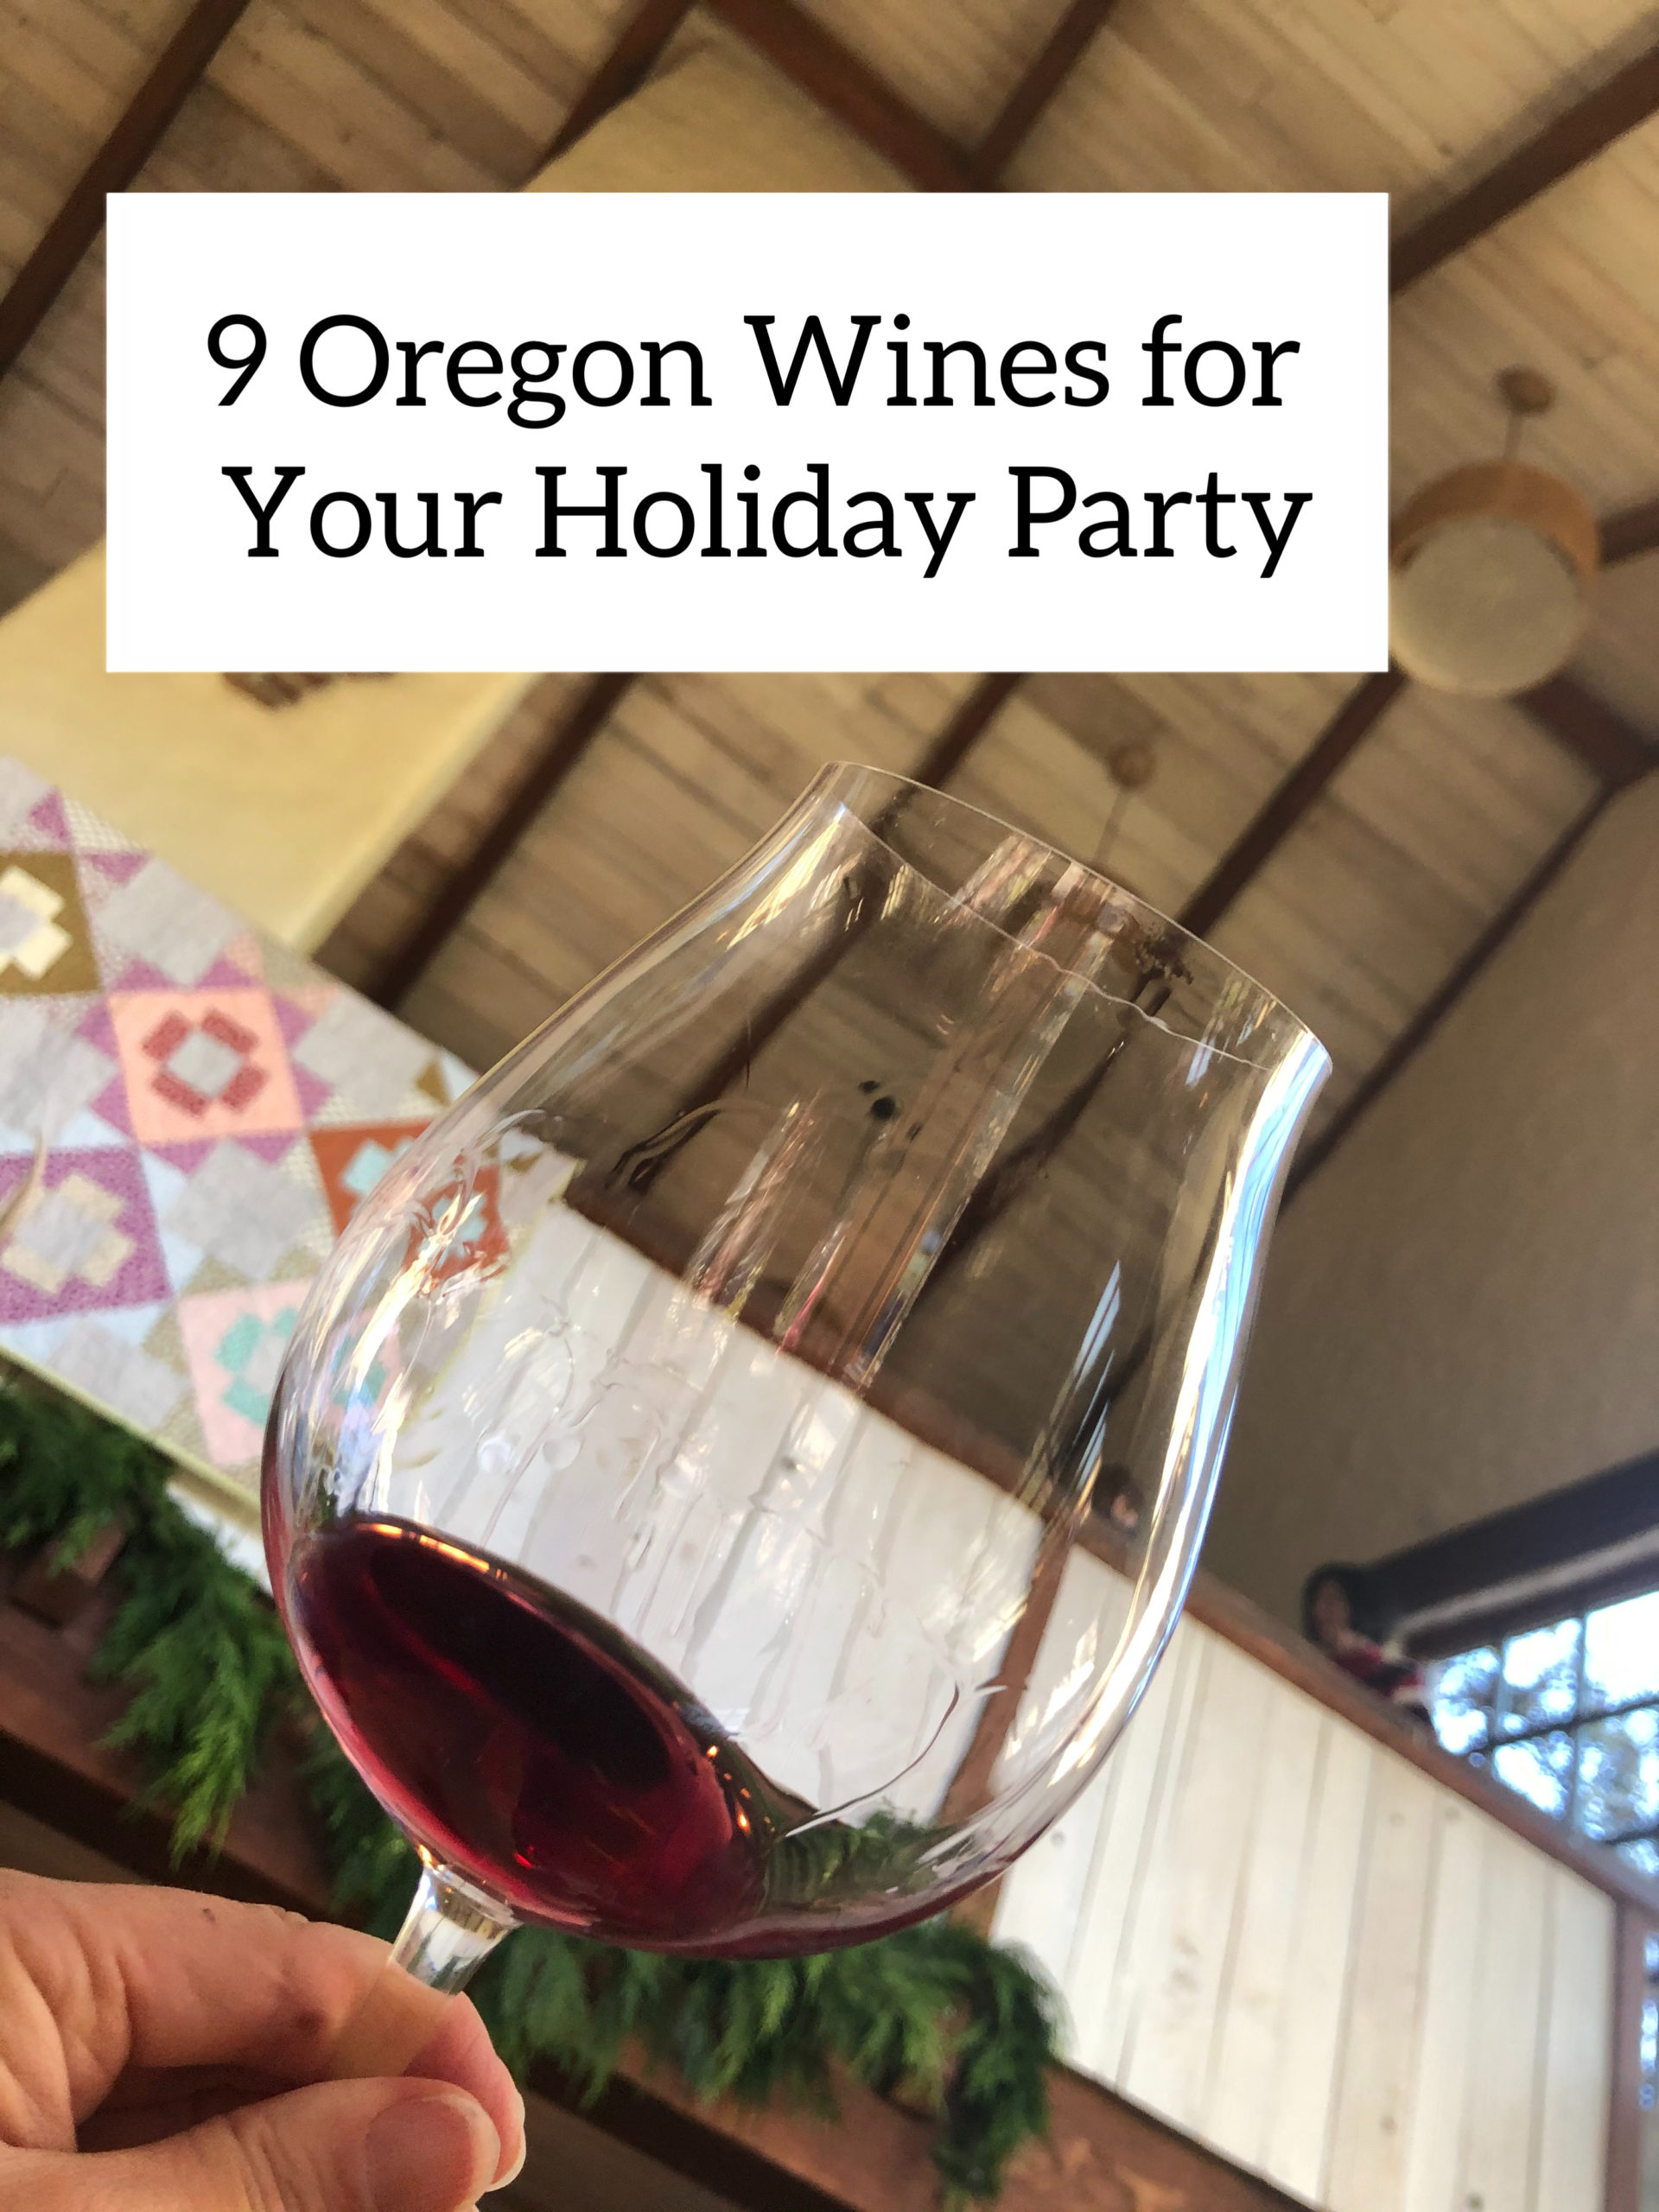 9 Oregon Wines for Your Holiday Party